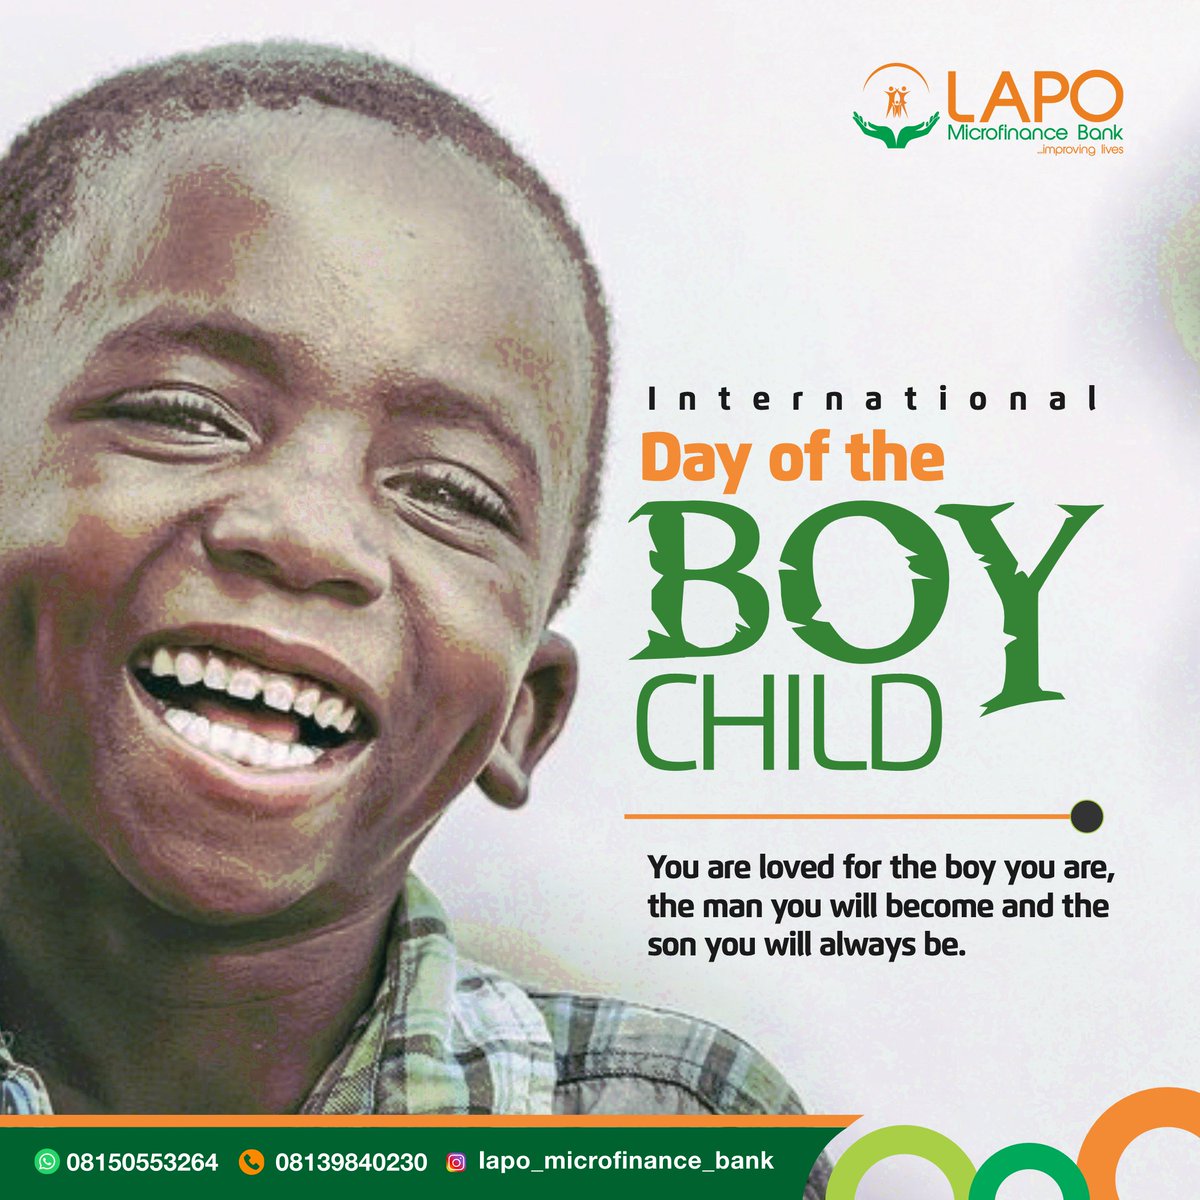 Happy International Day of the Boy Child!
To all the amazing boys out there – you are strong, curious, and full of potential.

We celebrate you for who you are, the men you will become, and the incredible sons you will always be. 

#InternationalBoyChildDay #ImprovingLives